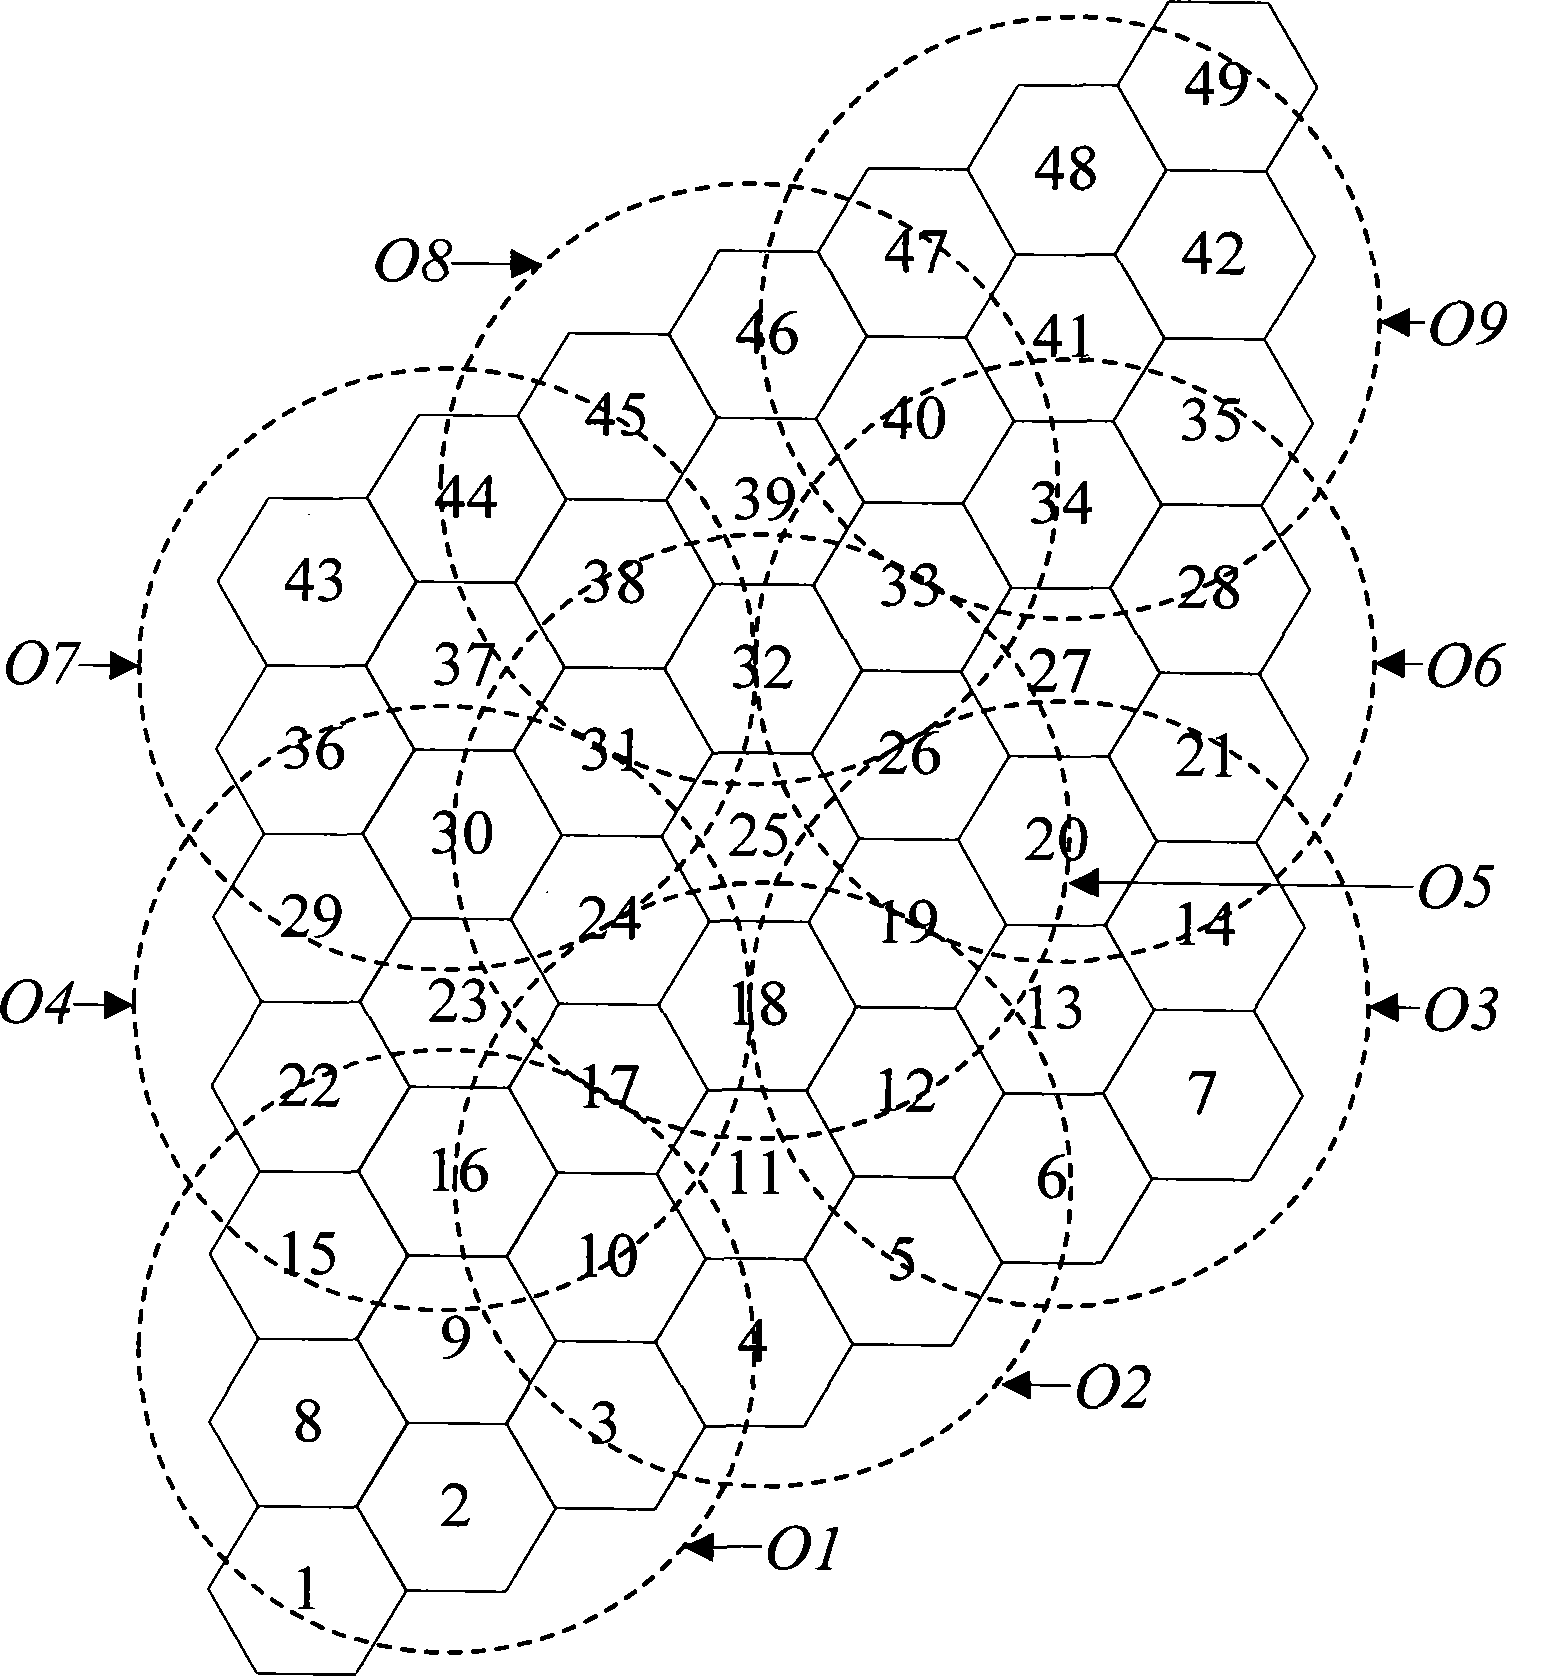 Dynamic frequency allocation method for cognitive radio cellular network